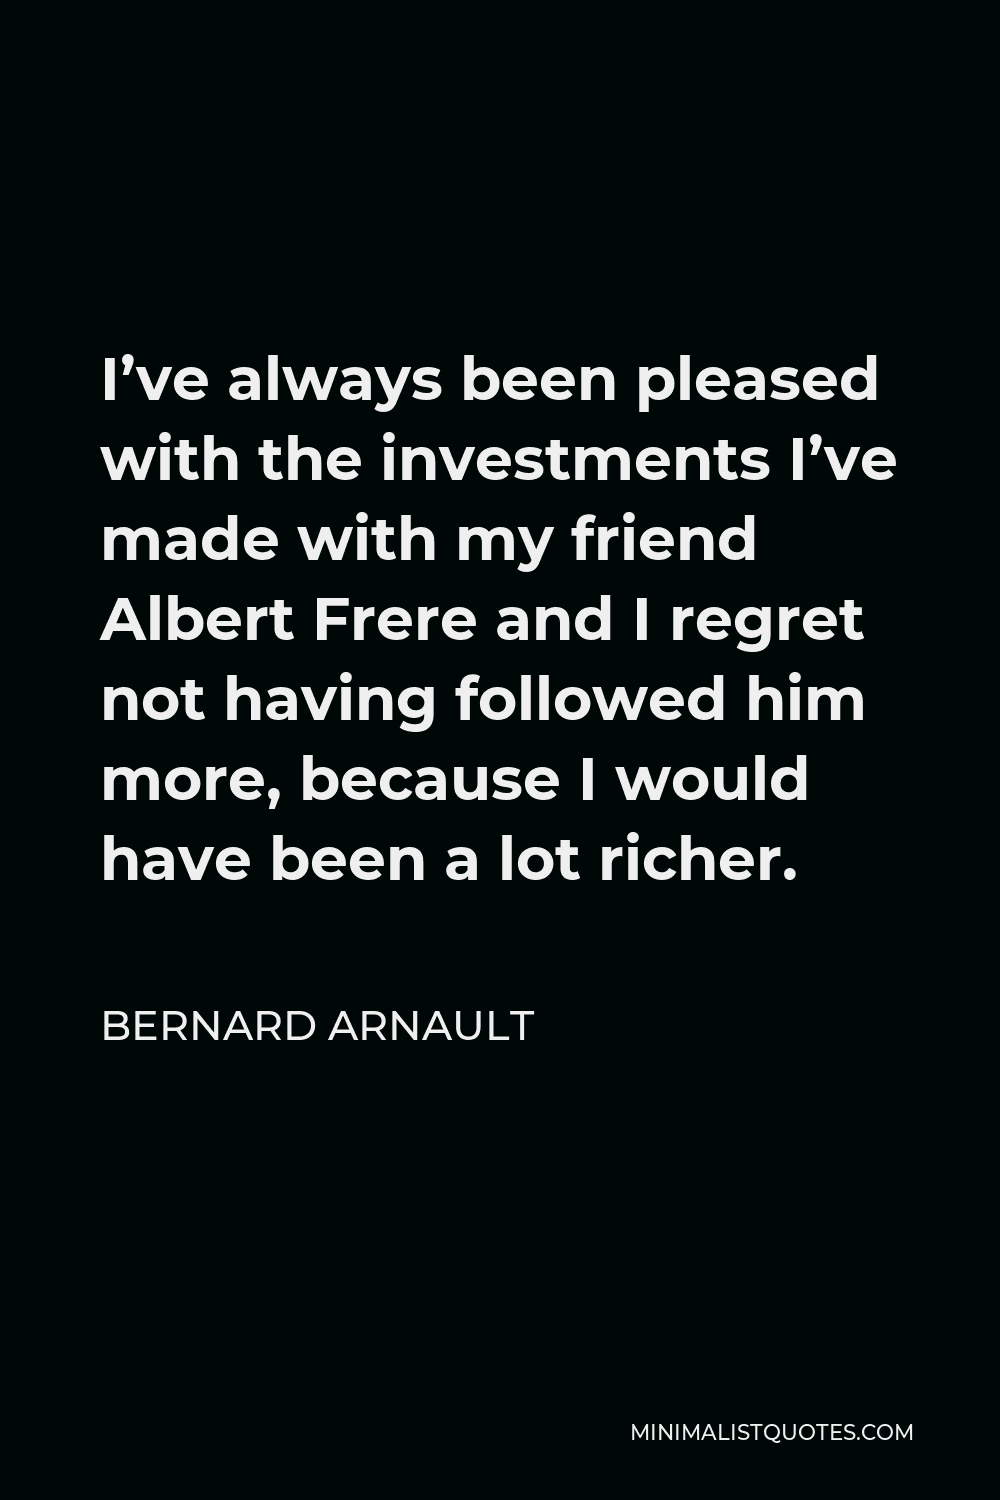 Bernard Arnault Quote - I’ve always been pleased with the investments I’ve made with my friend Albert Frere and I regret not having followed him more, because I would have been a lot richer.